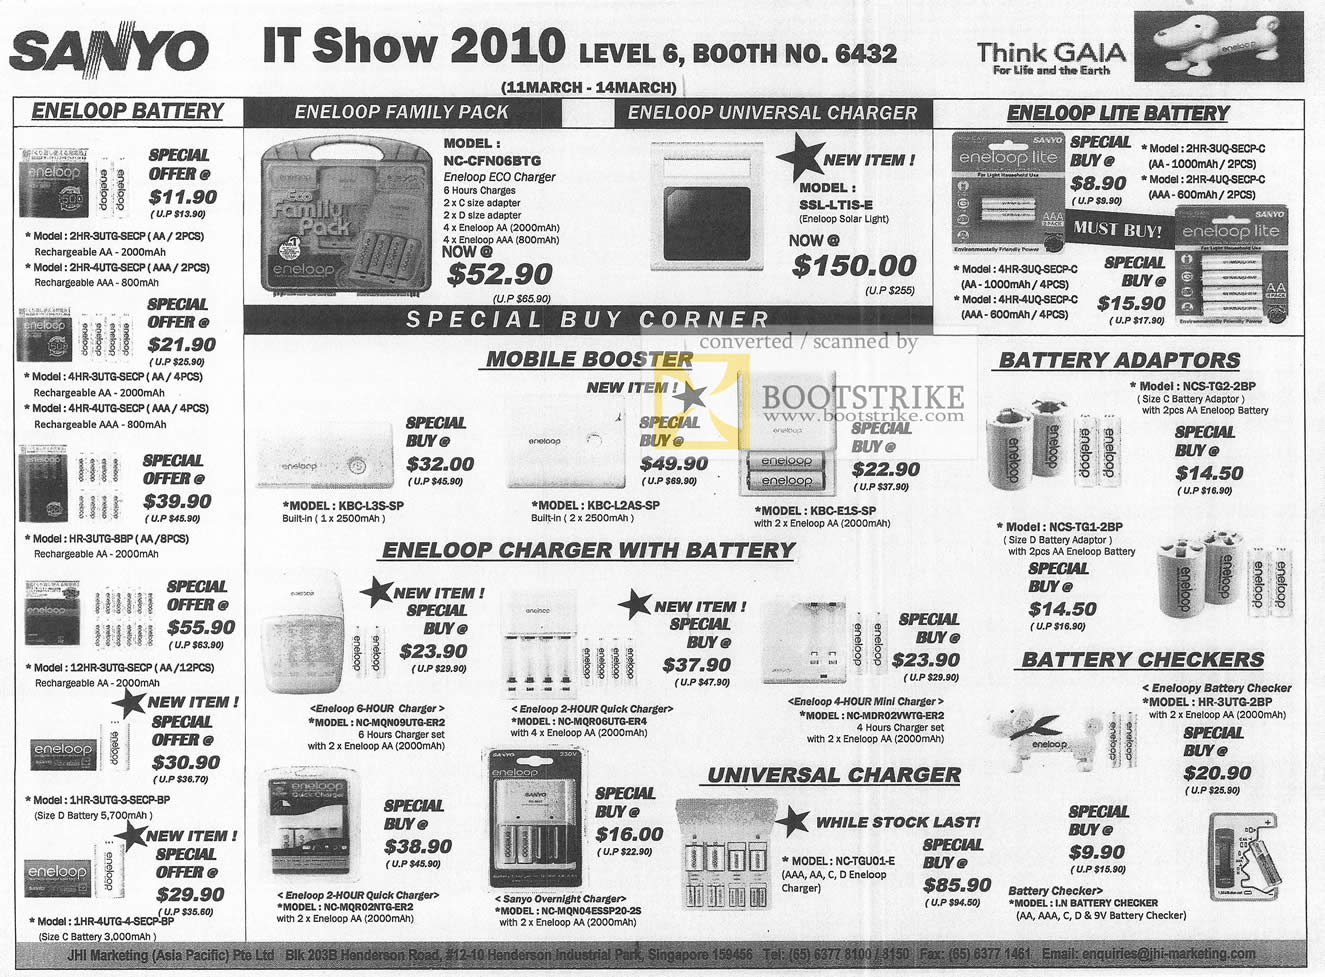 IT Show 2010 price list image brochure of Sanyo Eneloop Battery Family Pack Universal Charger Lite Mobile Booster Adaptors Checkers